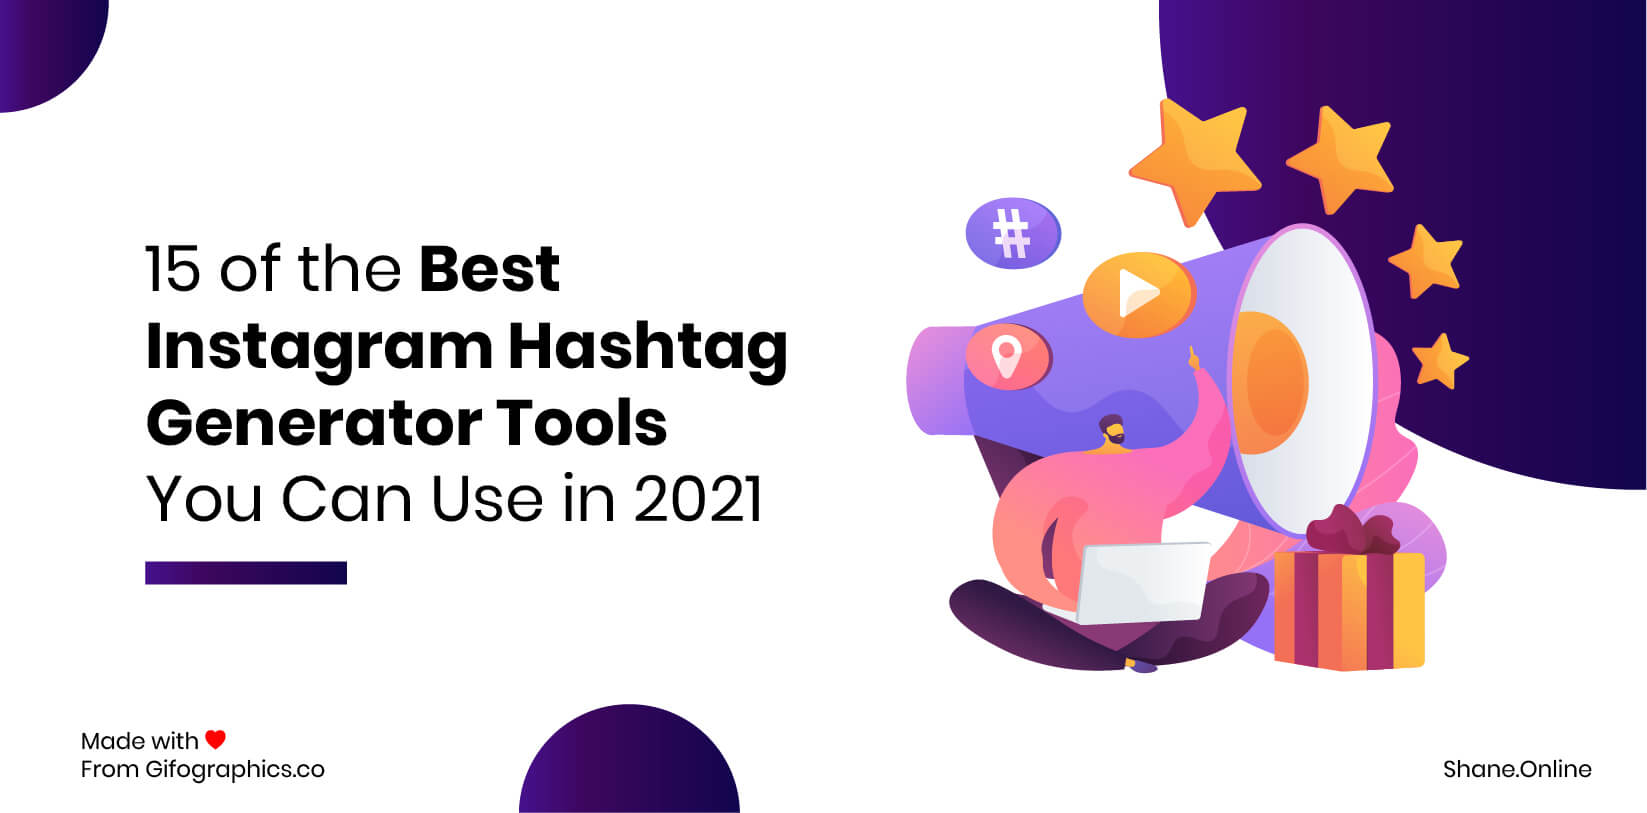 15 of the Best Instagram Hashtag Generator Tools You Can Use in 2021